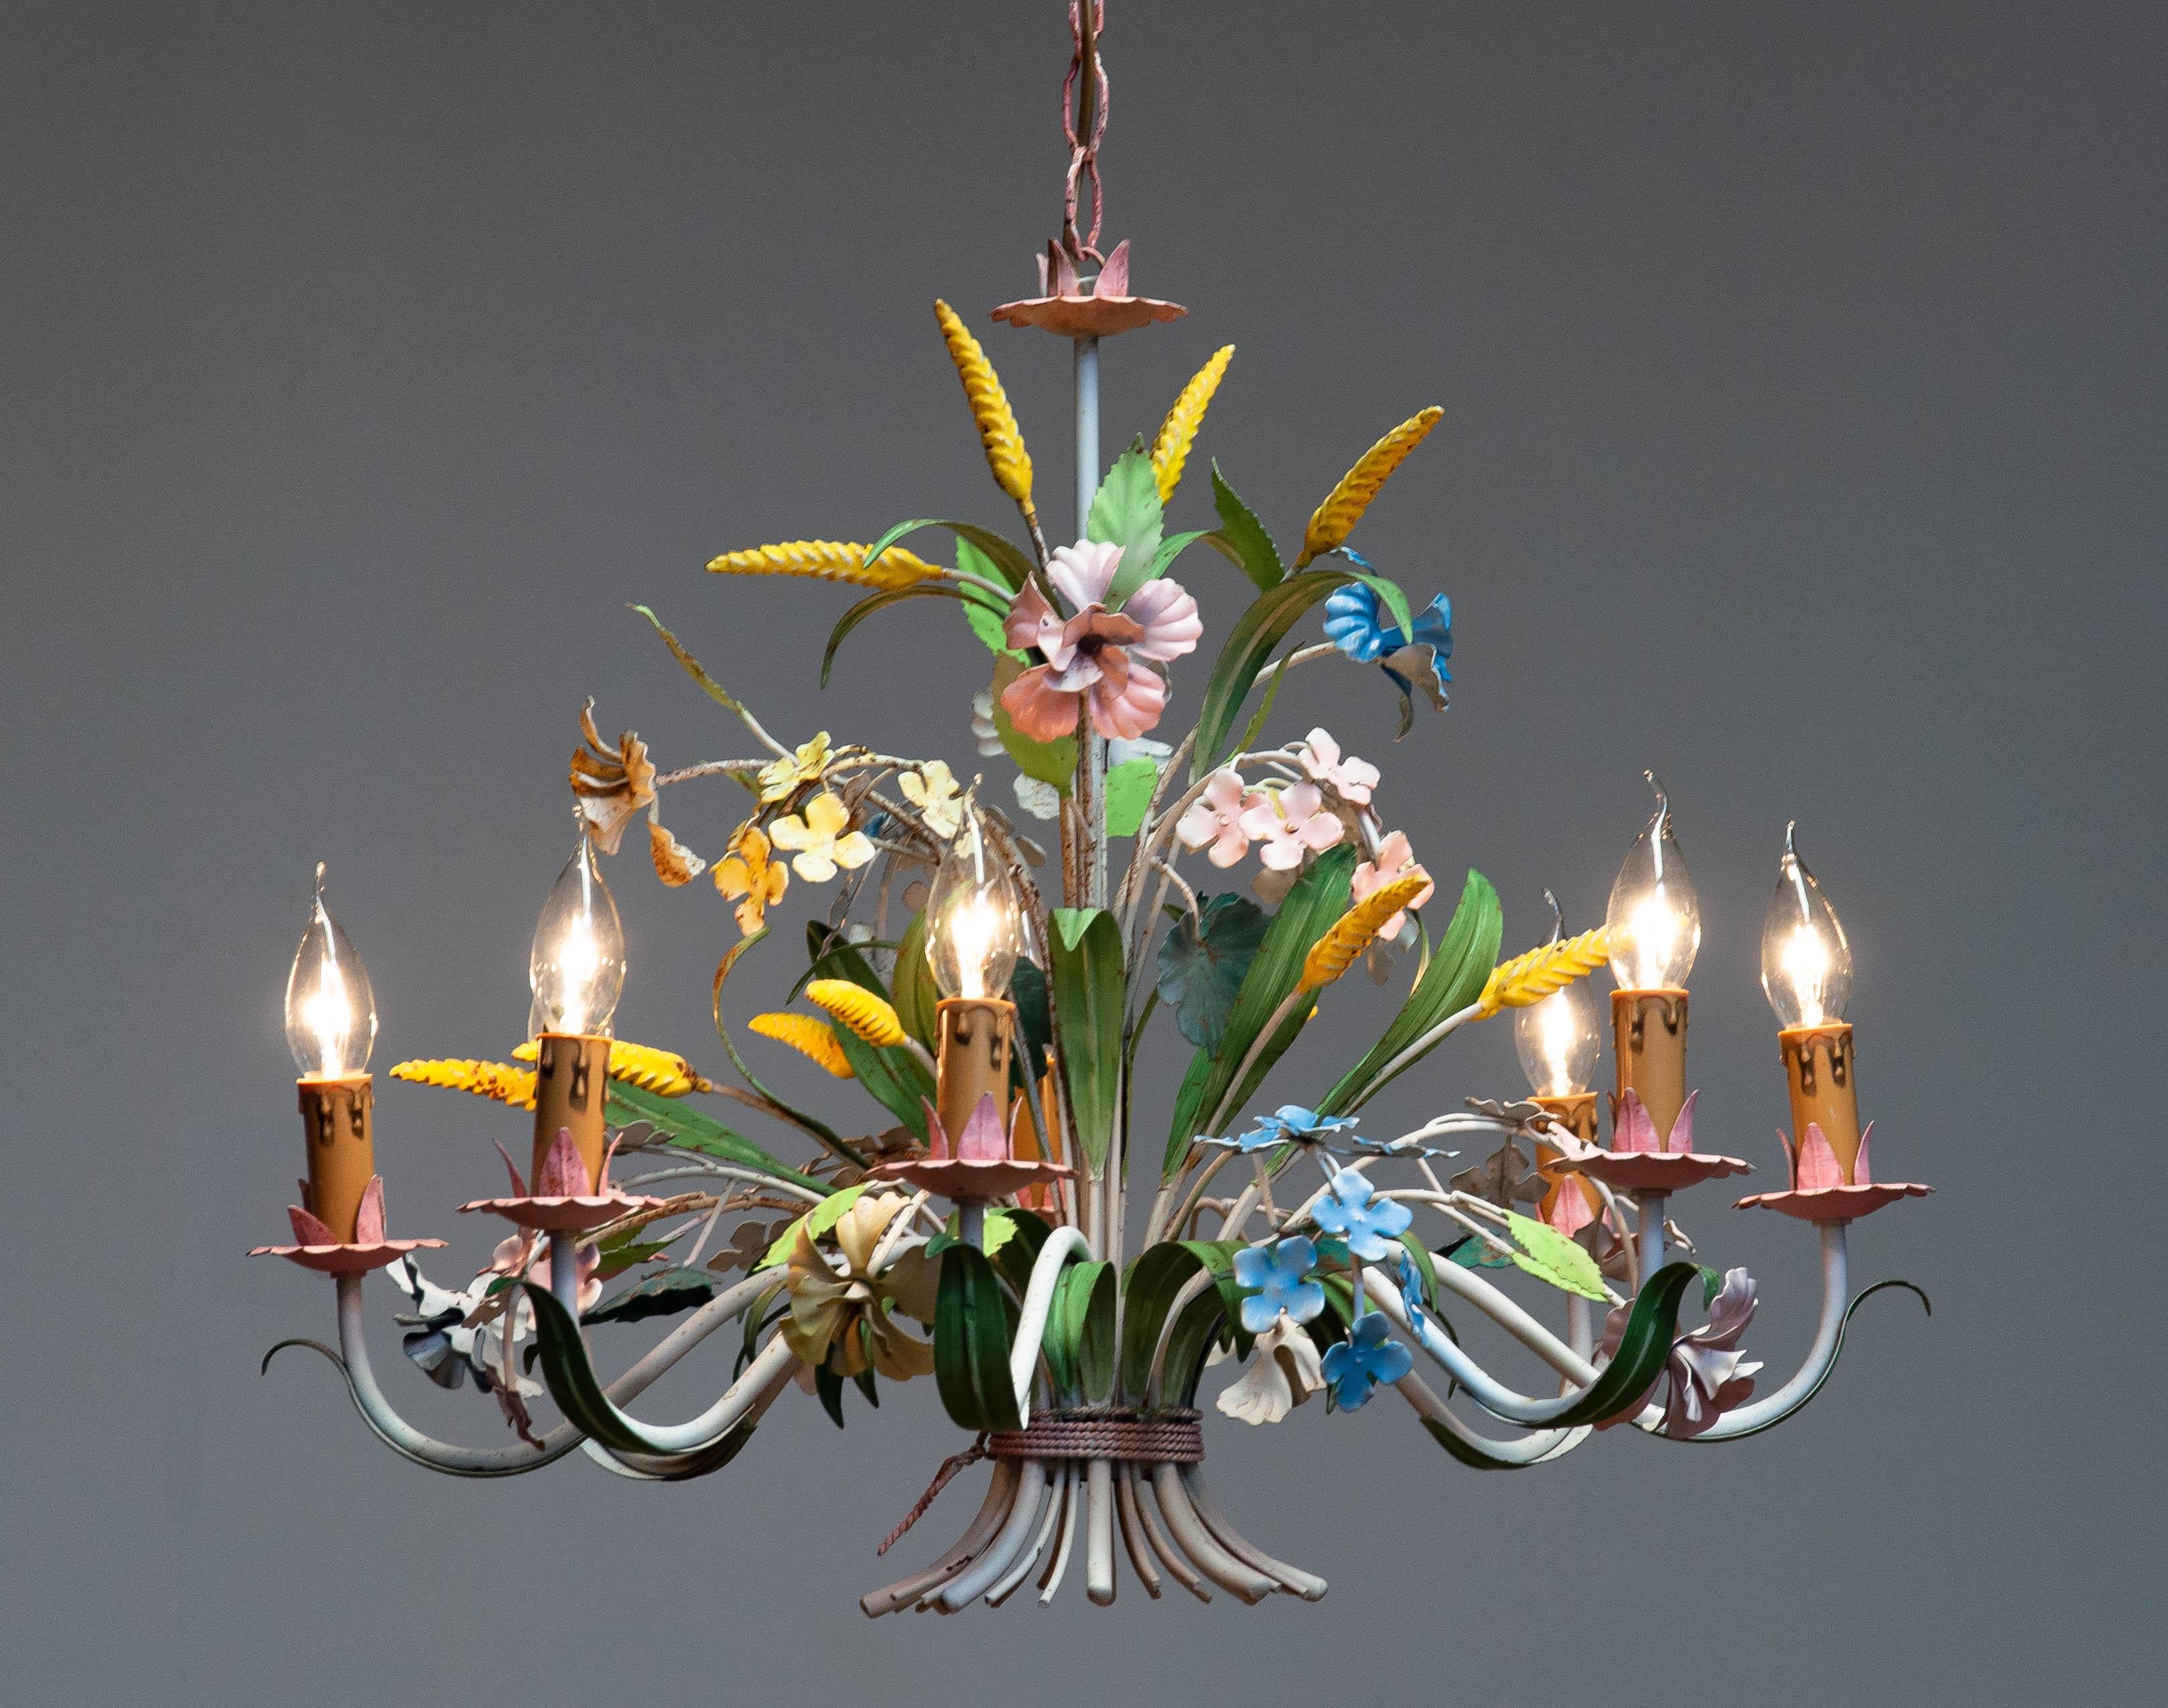 Mid-20th Century 1950s Large Boho Chic Italian Tole Painted Metal Chandelier With Floral Decor